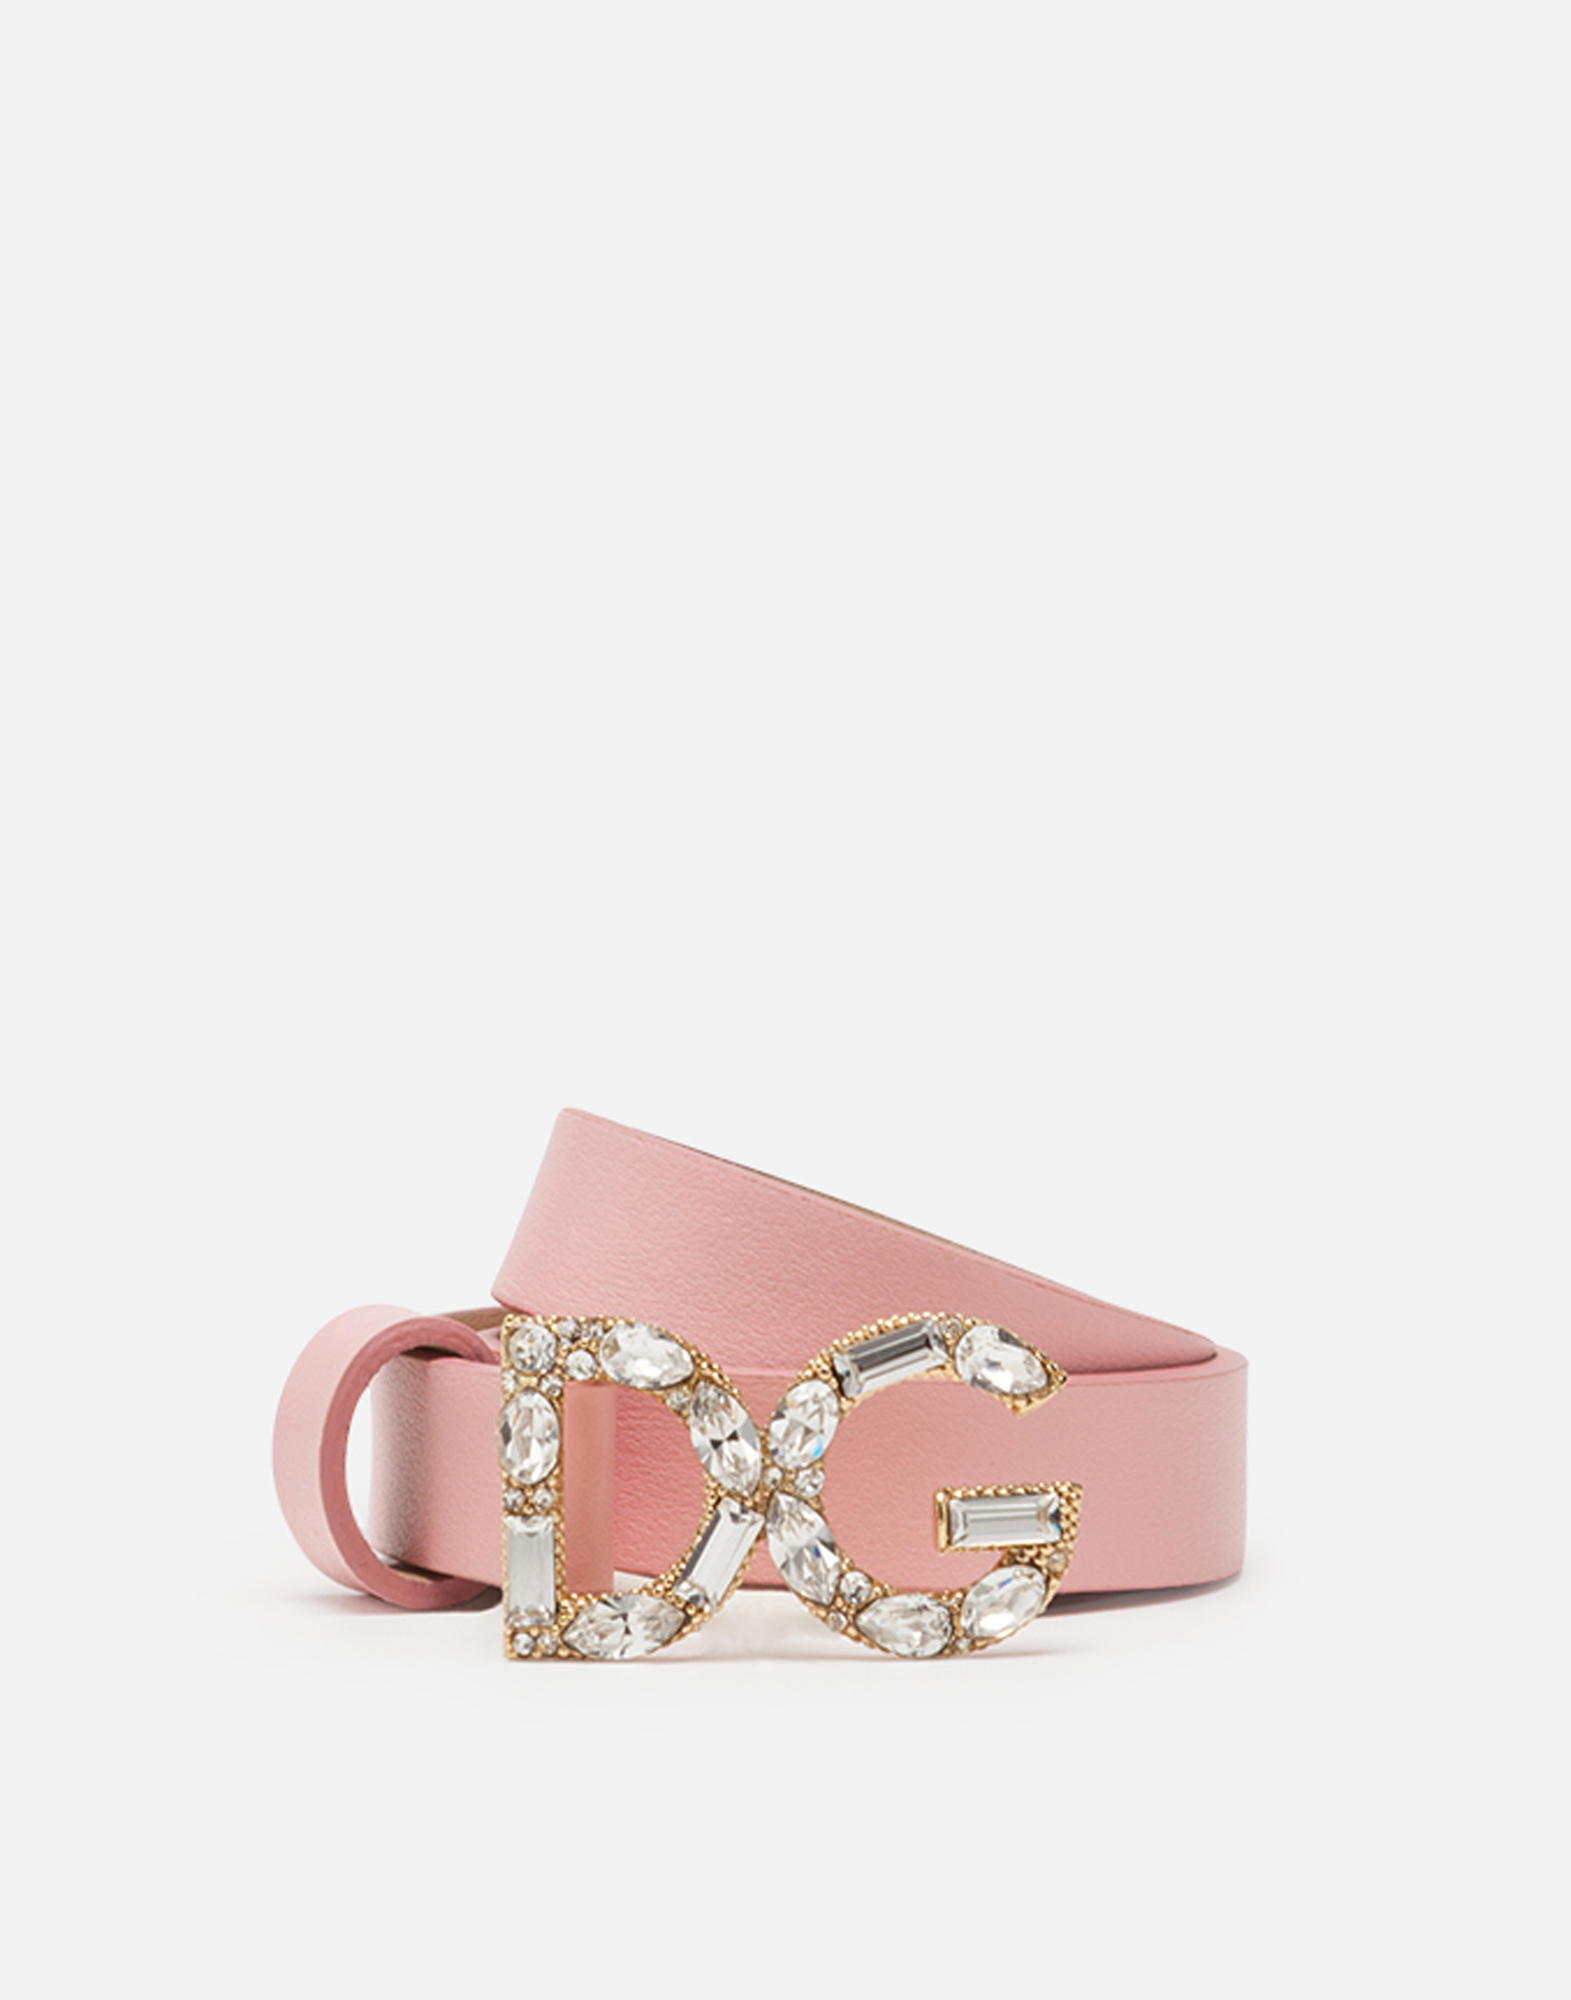 Nappa leather belt with DG buckle in Pink